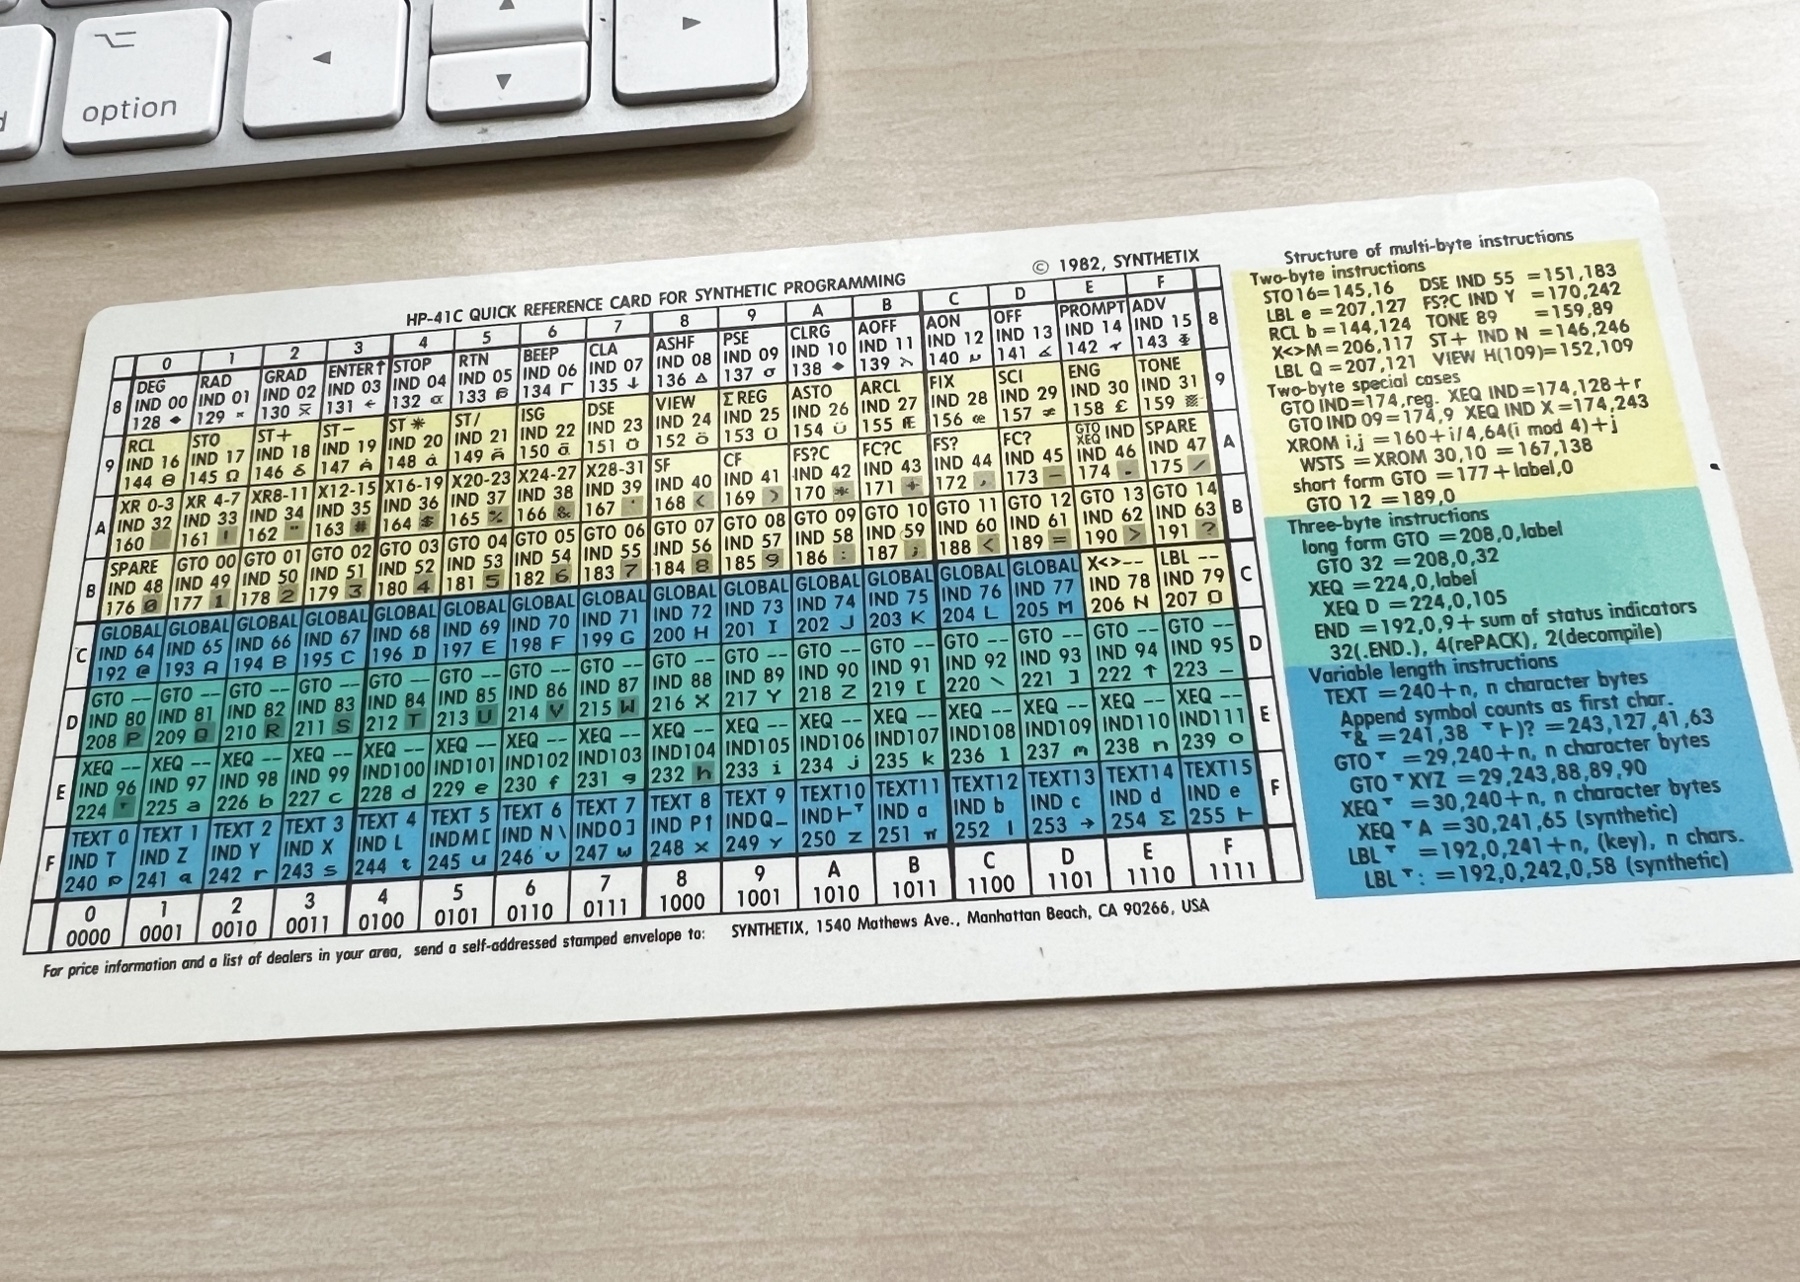 a card containing a very dense table of codes and instructions 